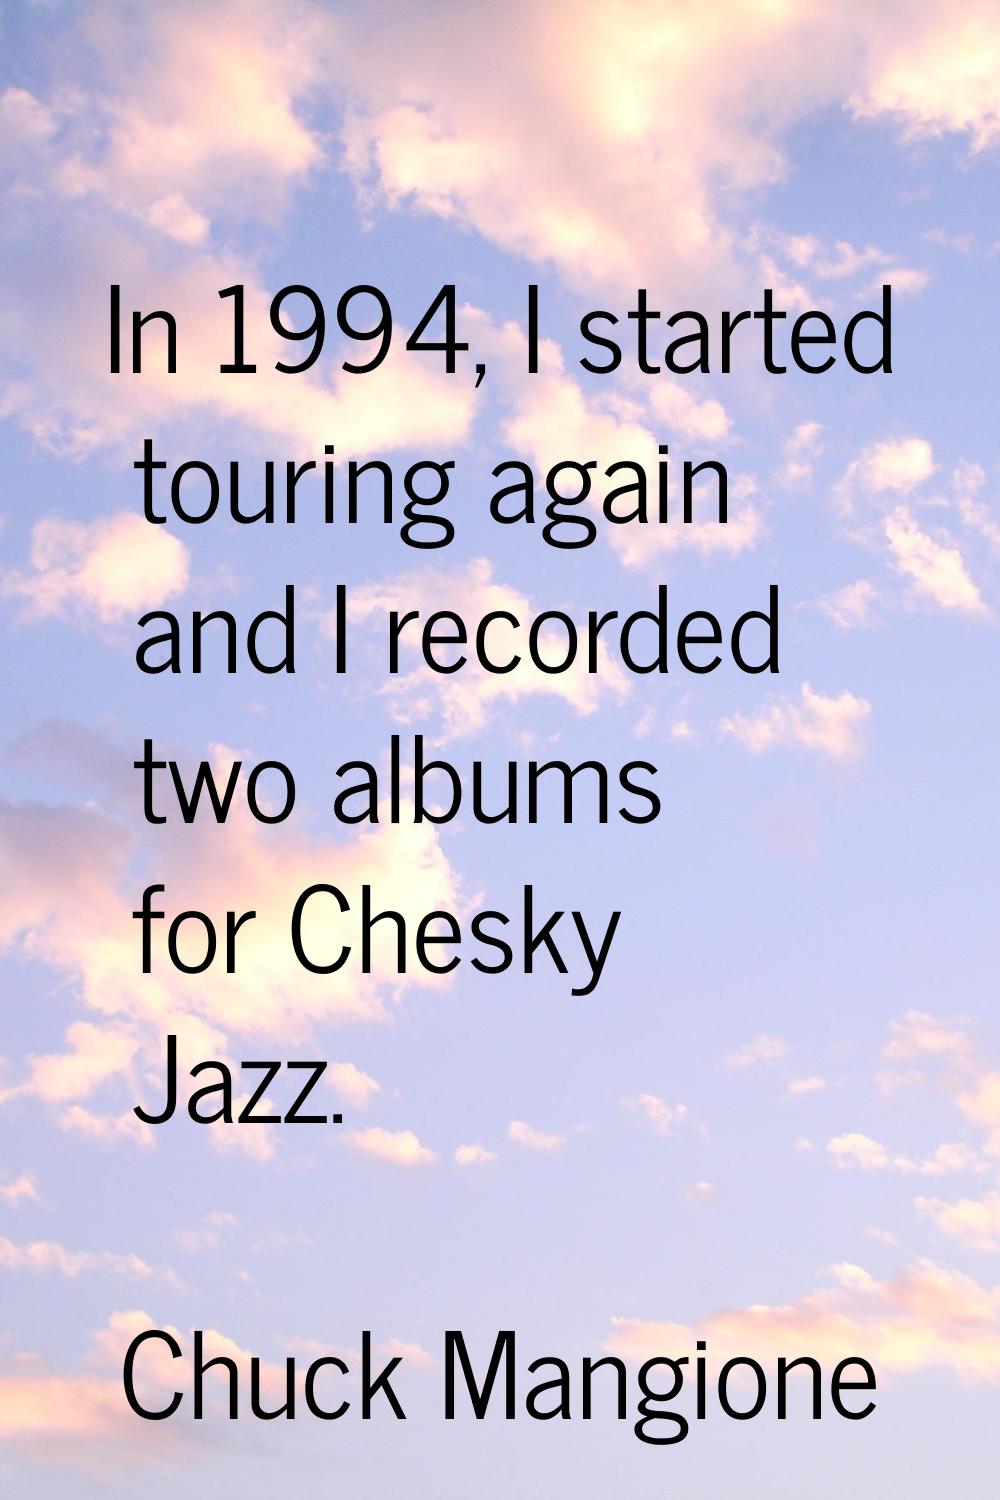 In 1994, I started touring again and I recorded two albums for Chesky Jazz.